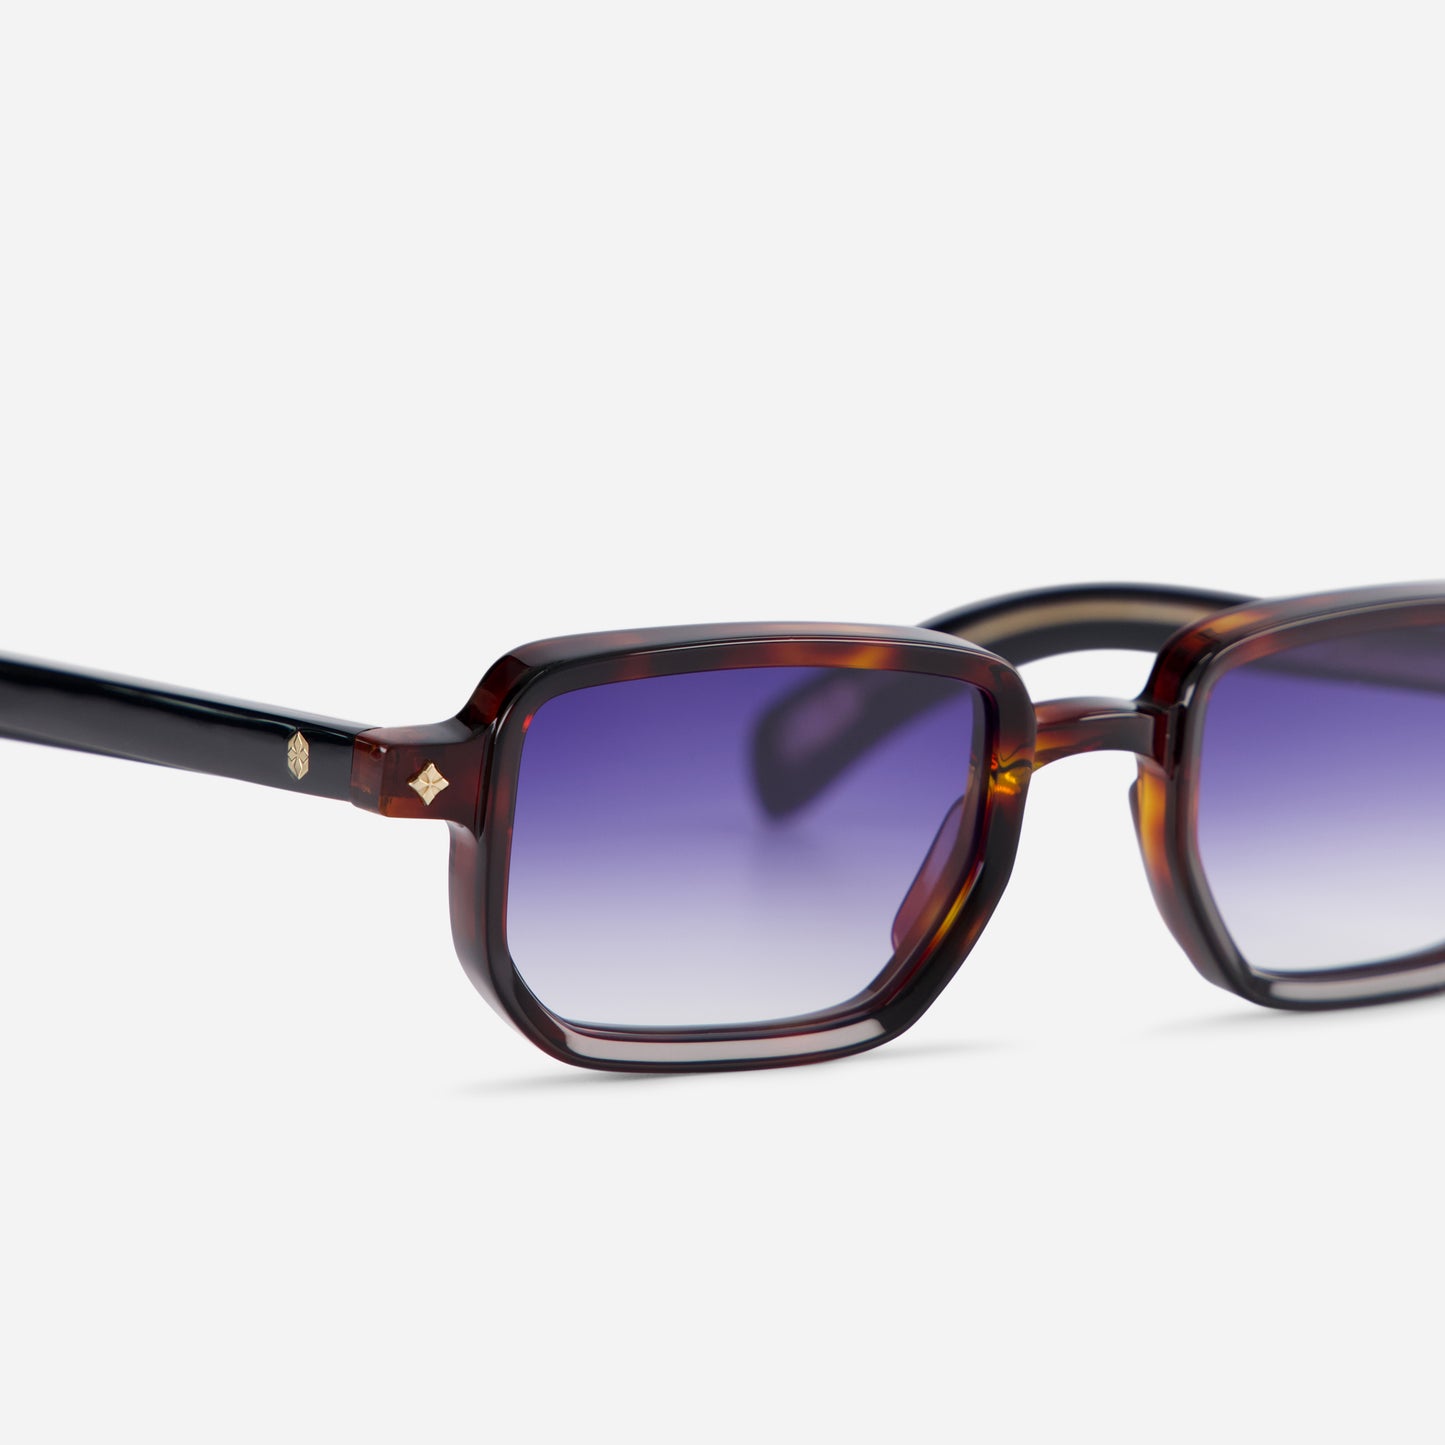 Ran G-1 offers a stylish Japanese acetate frame in Gambler color, featuring black arms and a tortoise front, and gradient new blue lenses, creating a contemporary look.